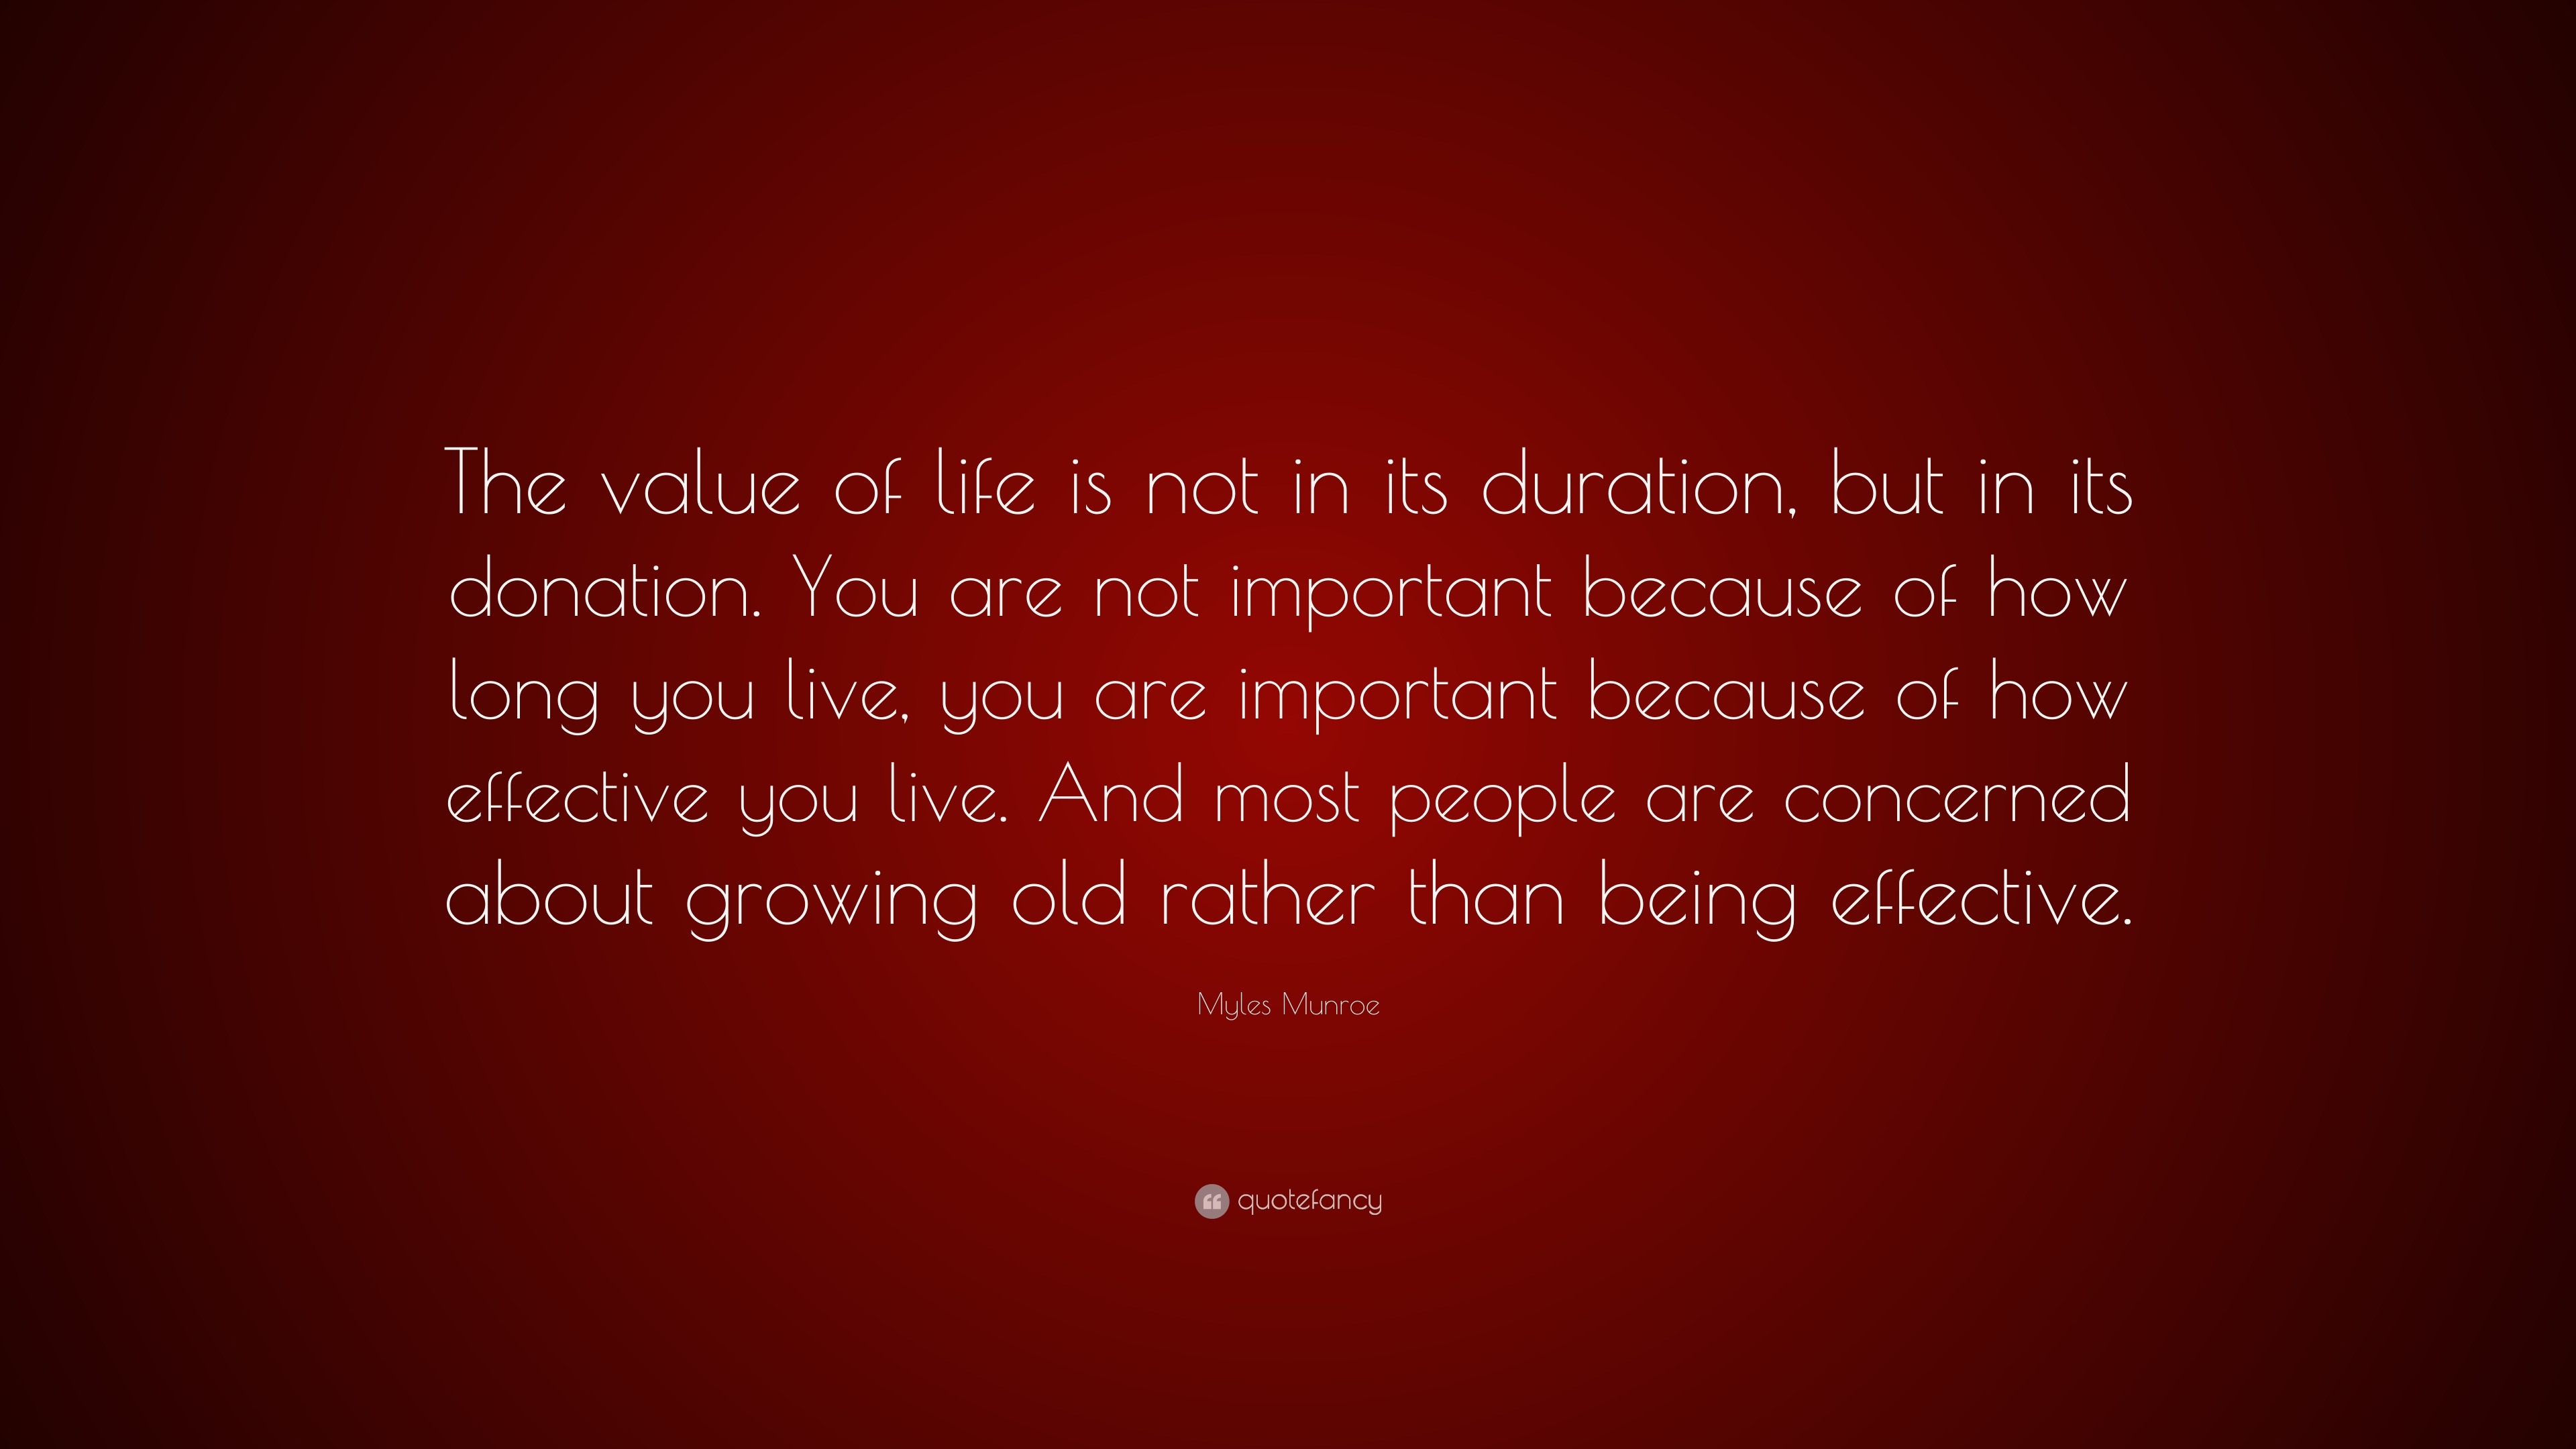 803771 Myles Munroe Quote The value of life is not in its duration but in